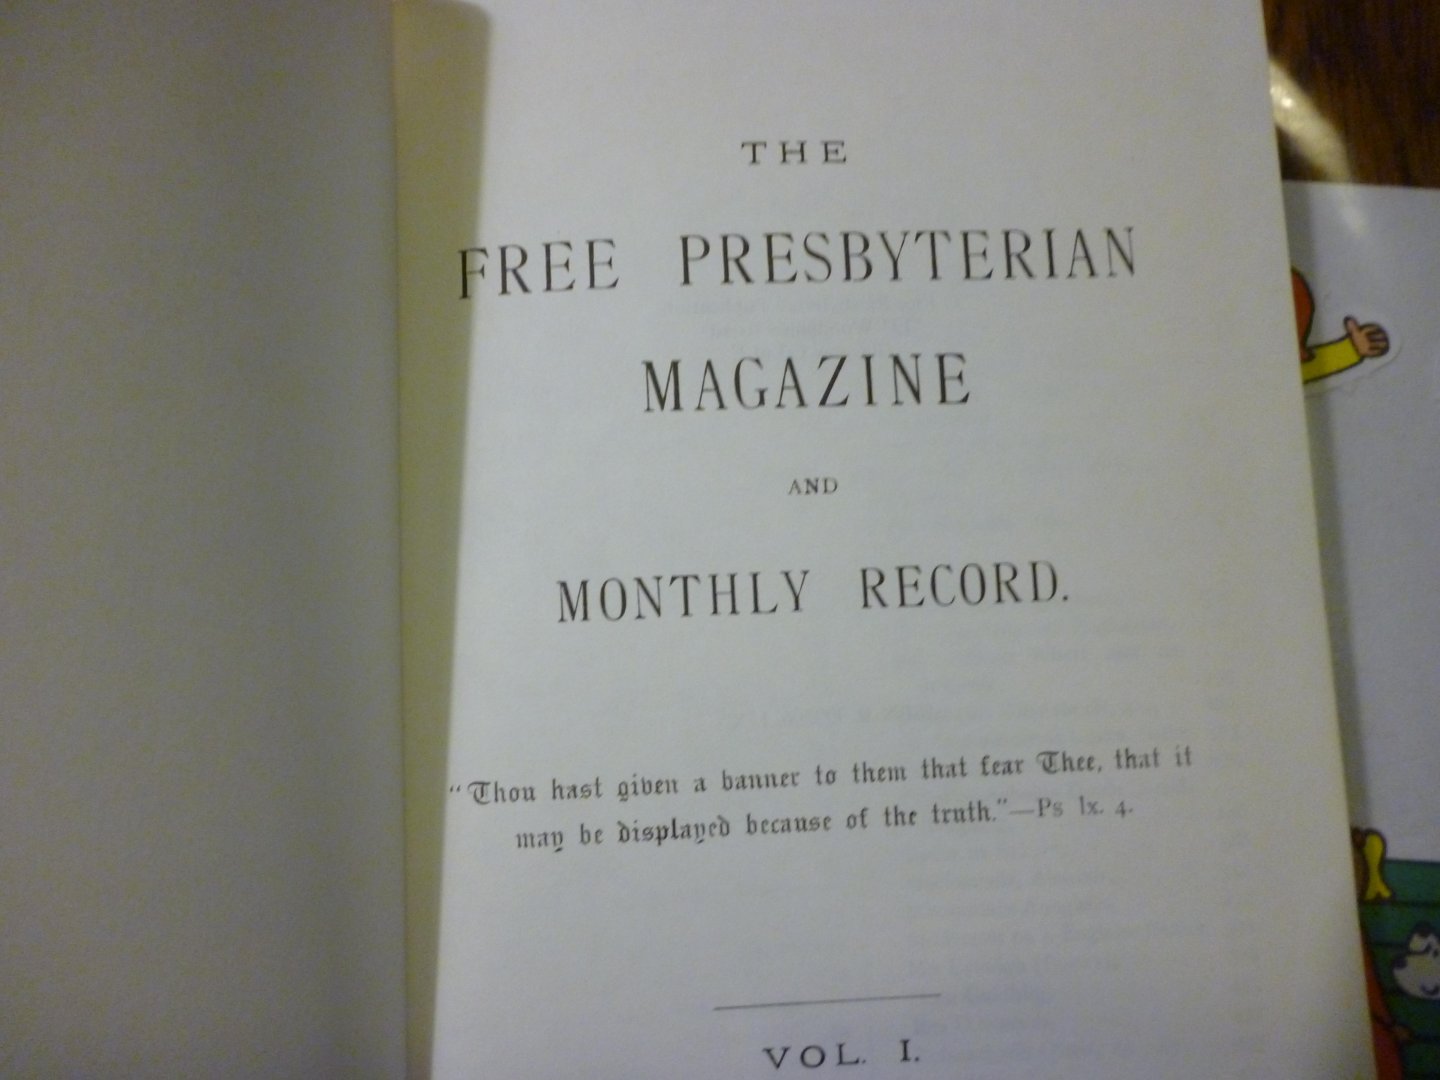  - The free presbyterian magazine and monthly record